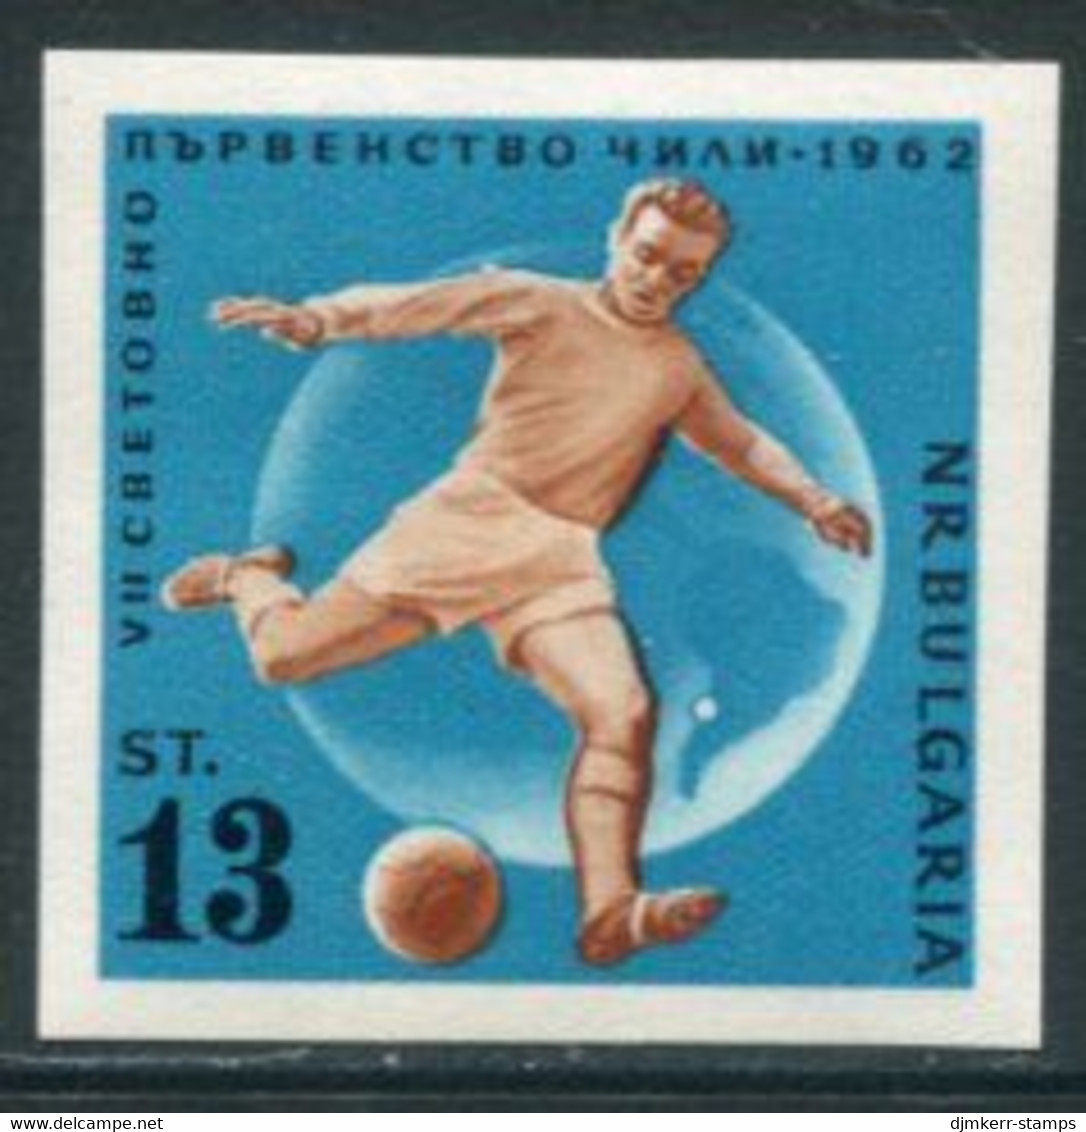 BULGARIA 1962 Football World Cup Imperforate  MNH / **.  Michel 1313 - Ungebraucht